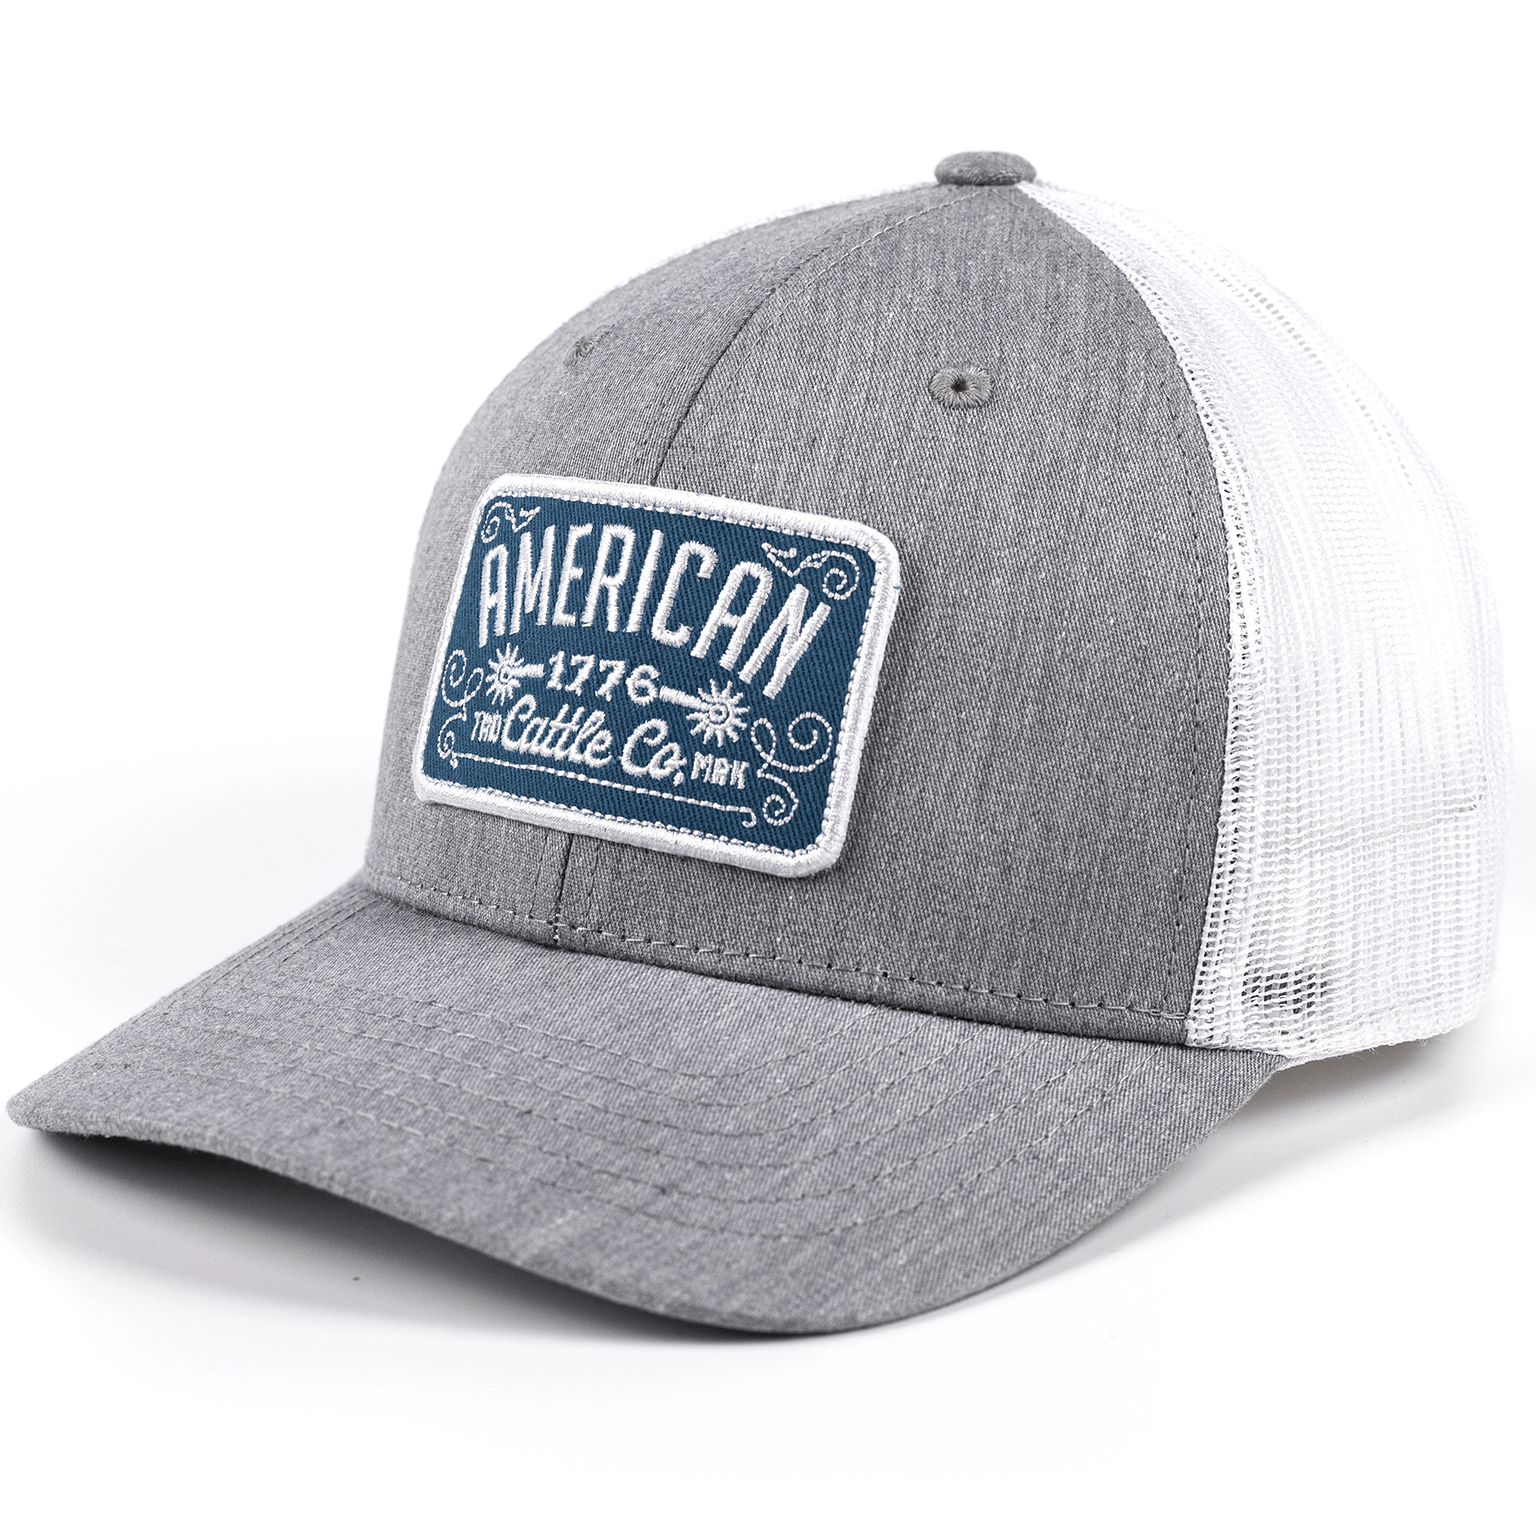 Rural Cloth Hats Western Hat-Gray/White